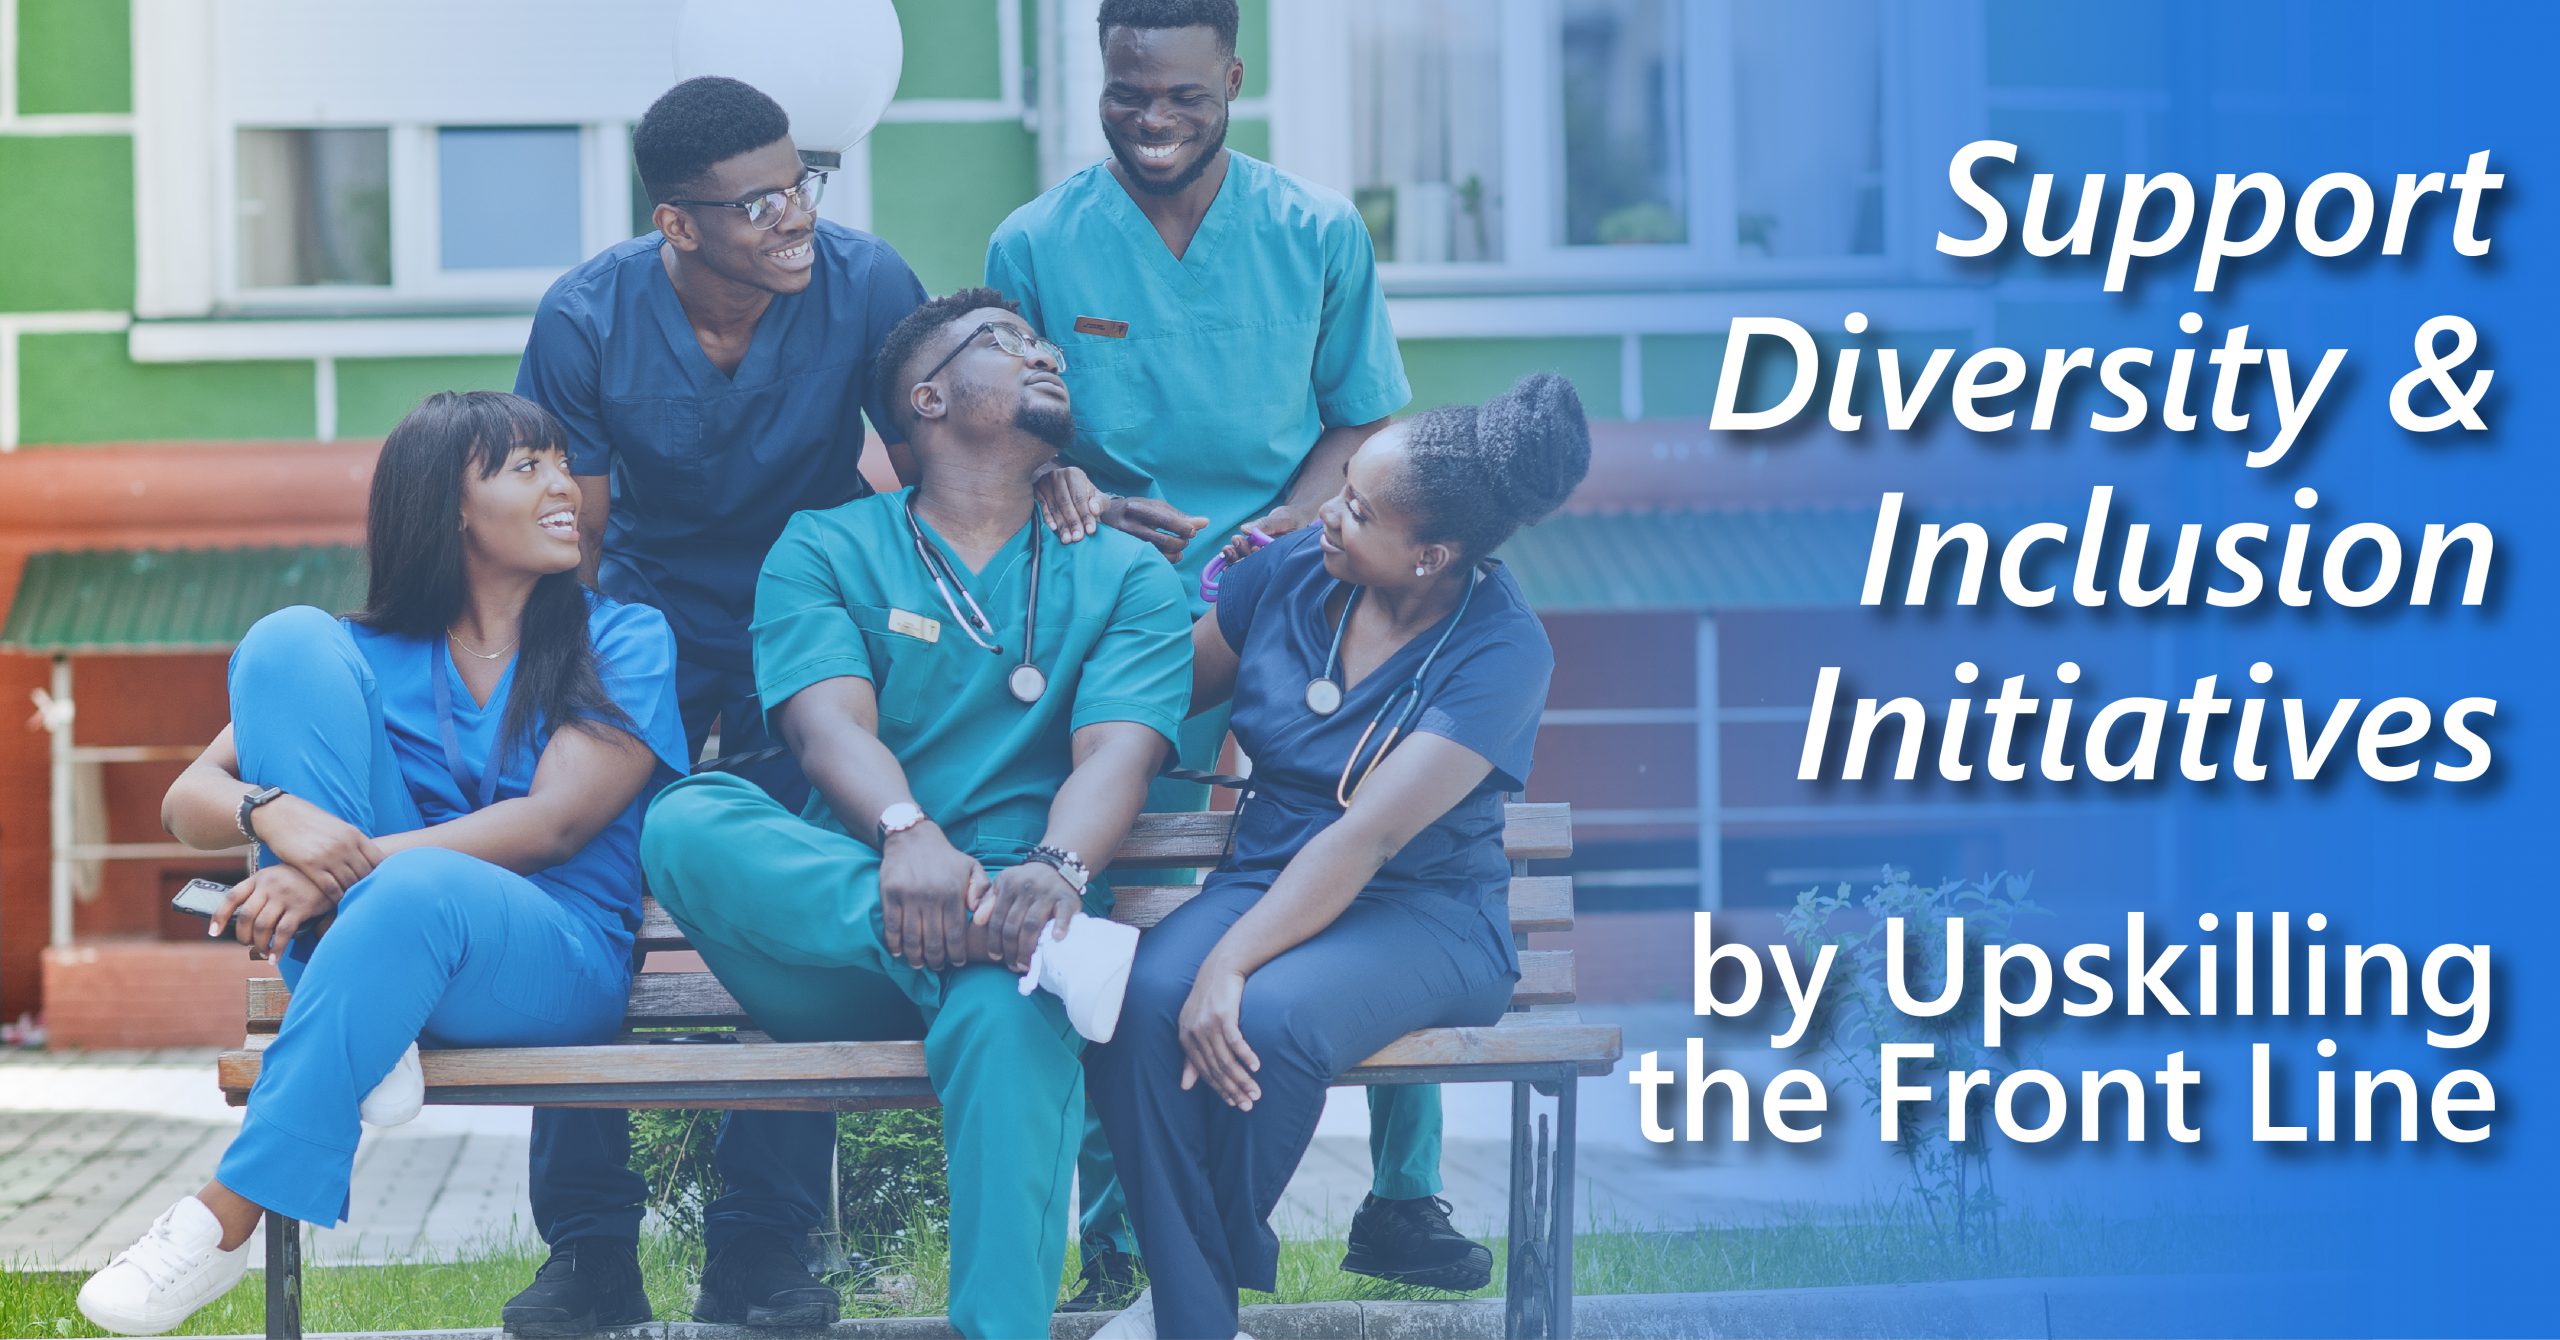 A group of young Black healthcare workers sit and stand laughing and talking around a park bench. The article title is superimposed on the image "Support Diversity and Inclusion Initiatives by Upskilling the Front Line